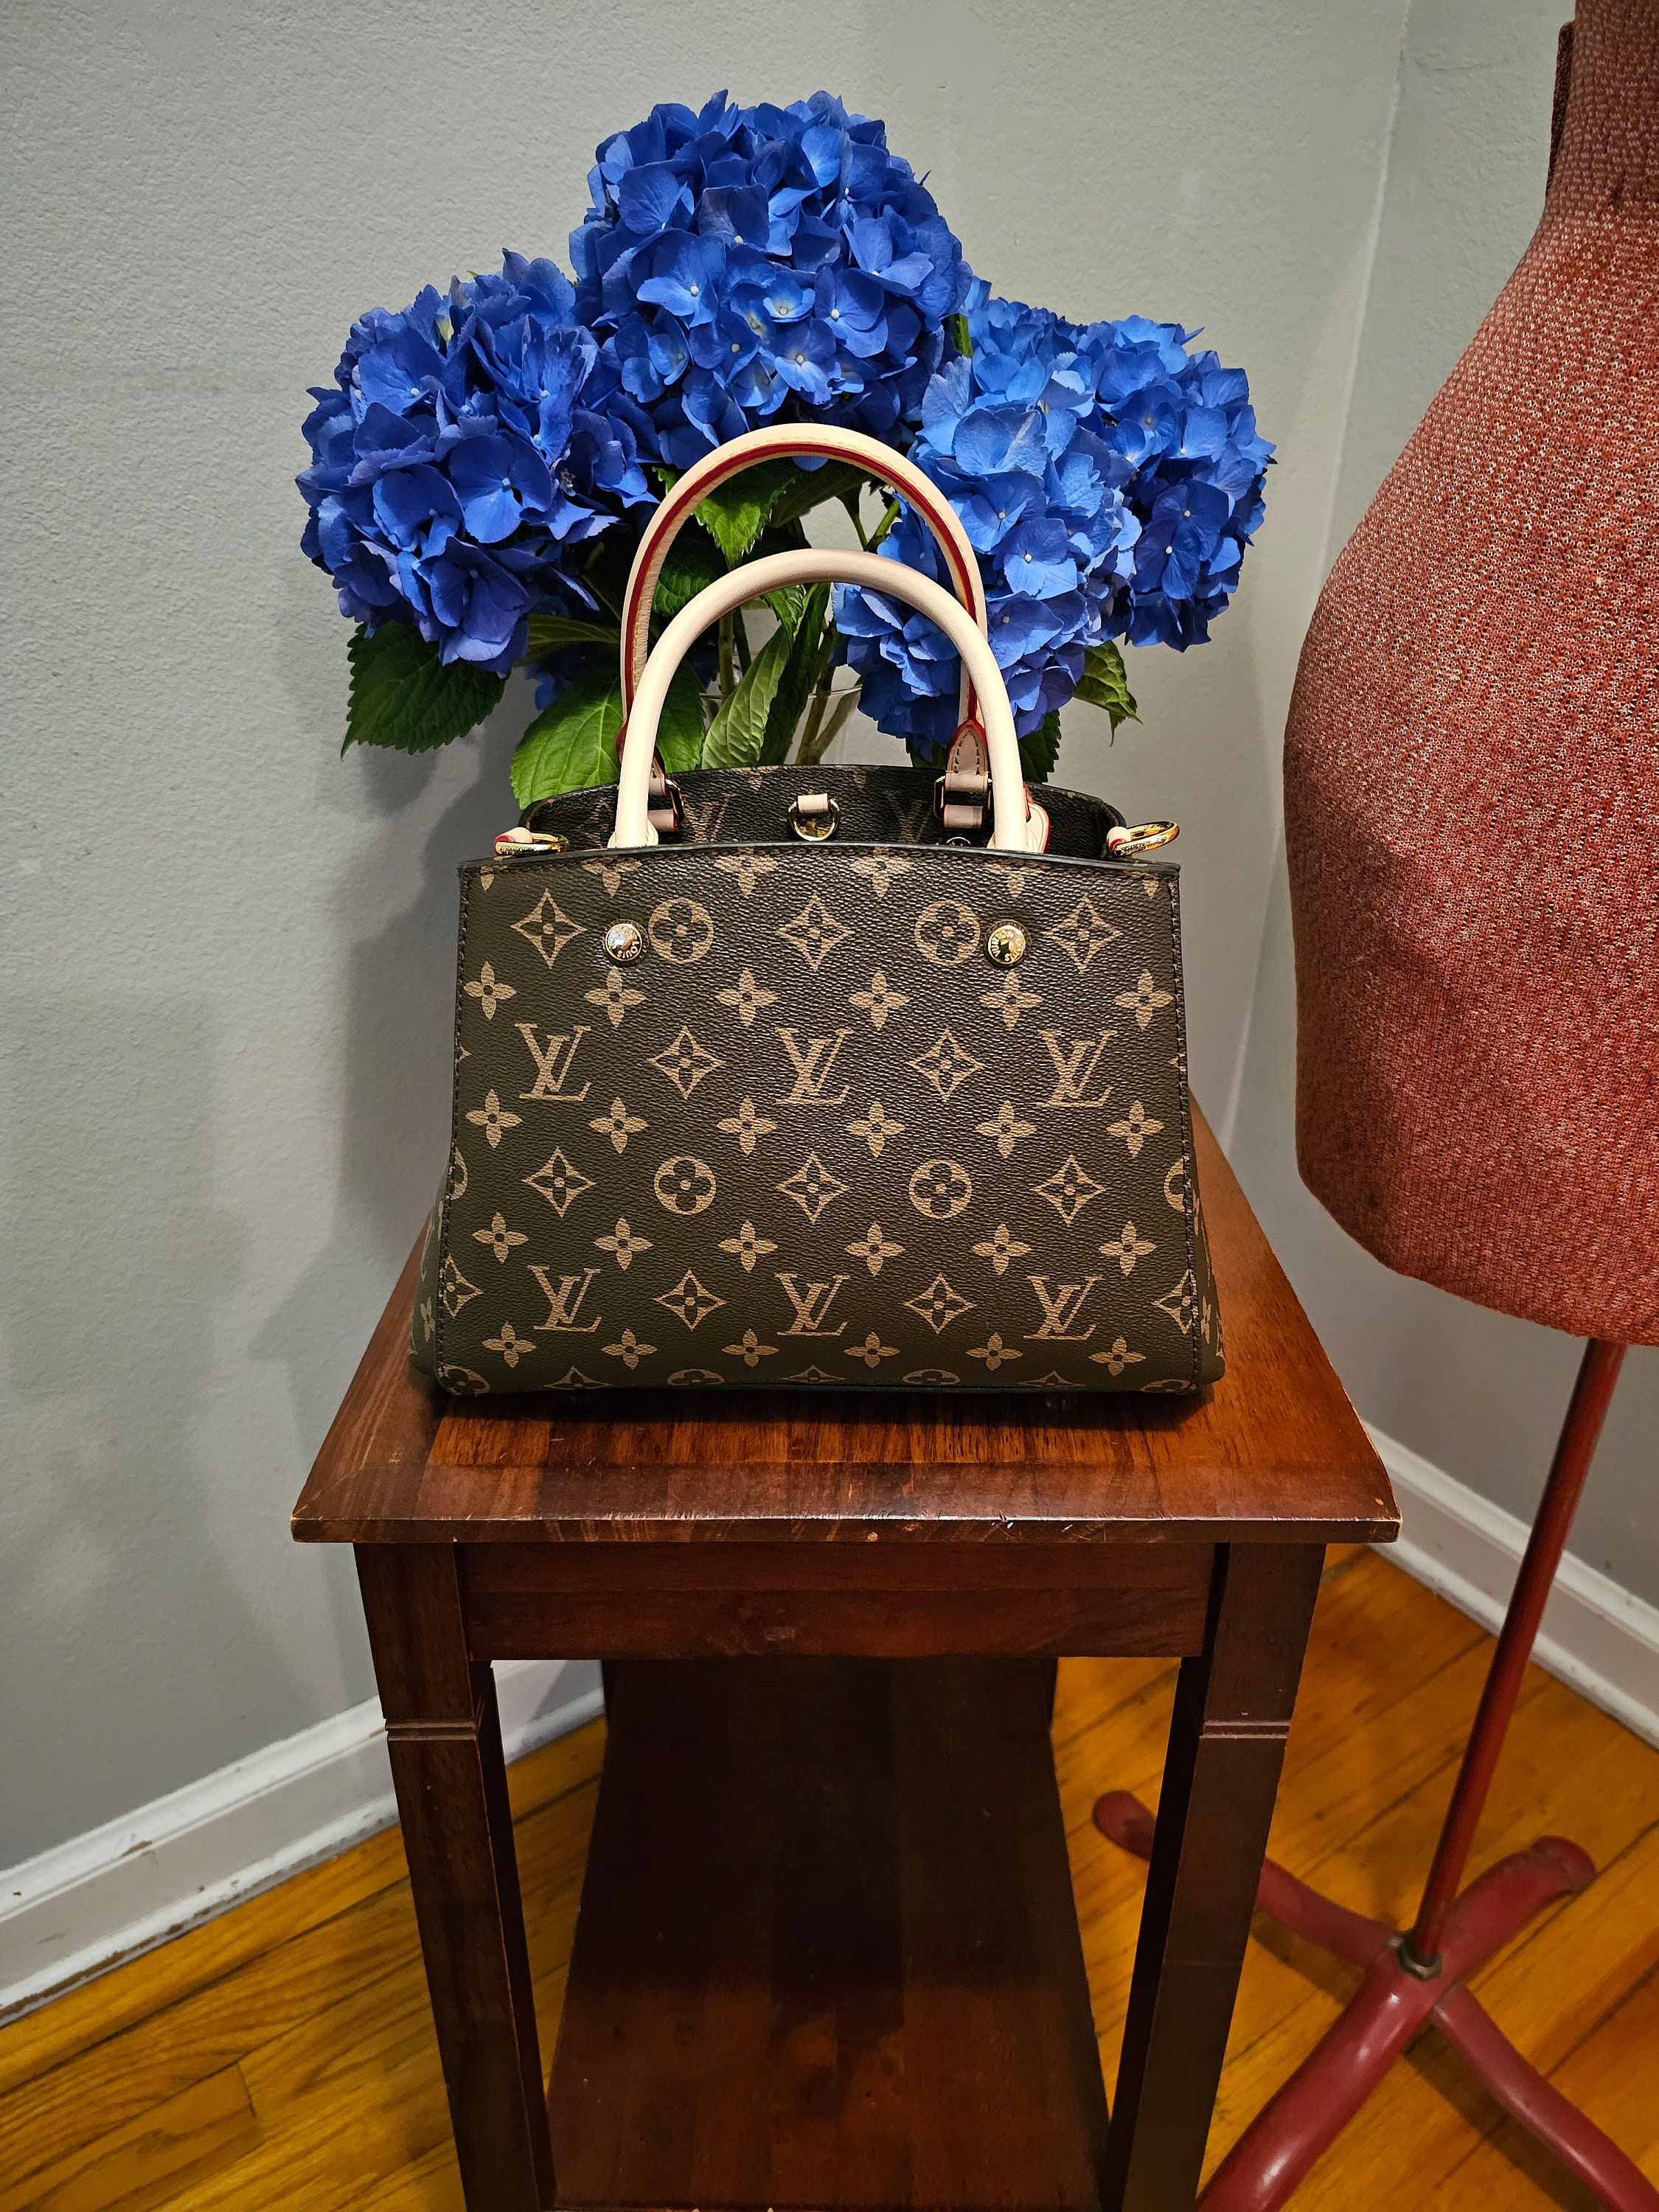 Suggestions for bags in the style of the discontinued LV Montaigne BB ? :  r/handbags